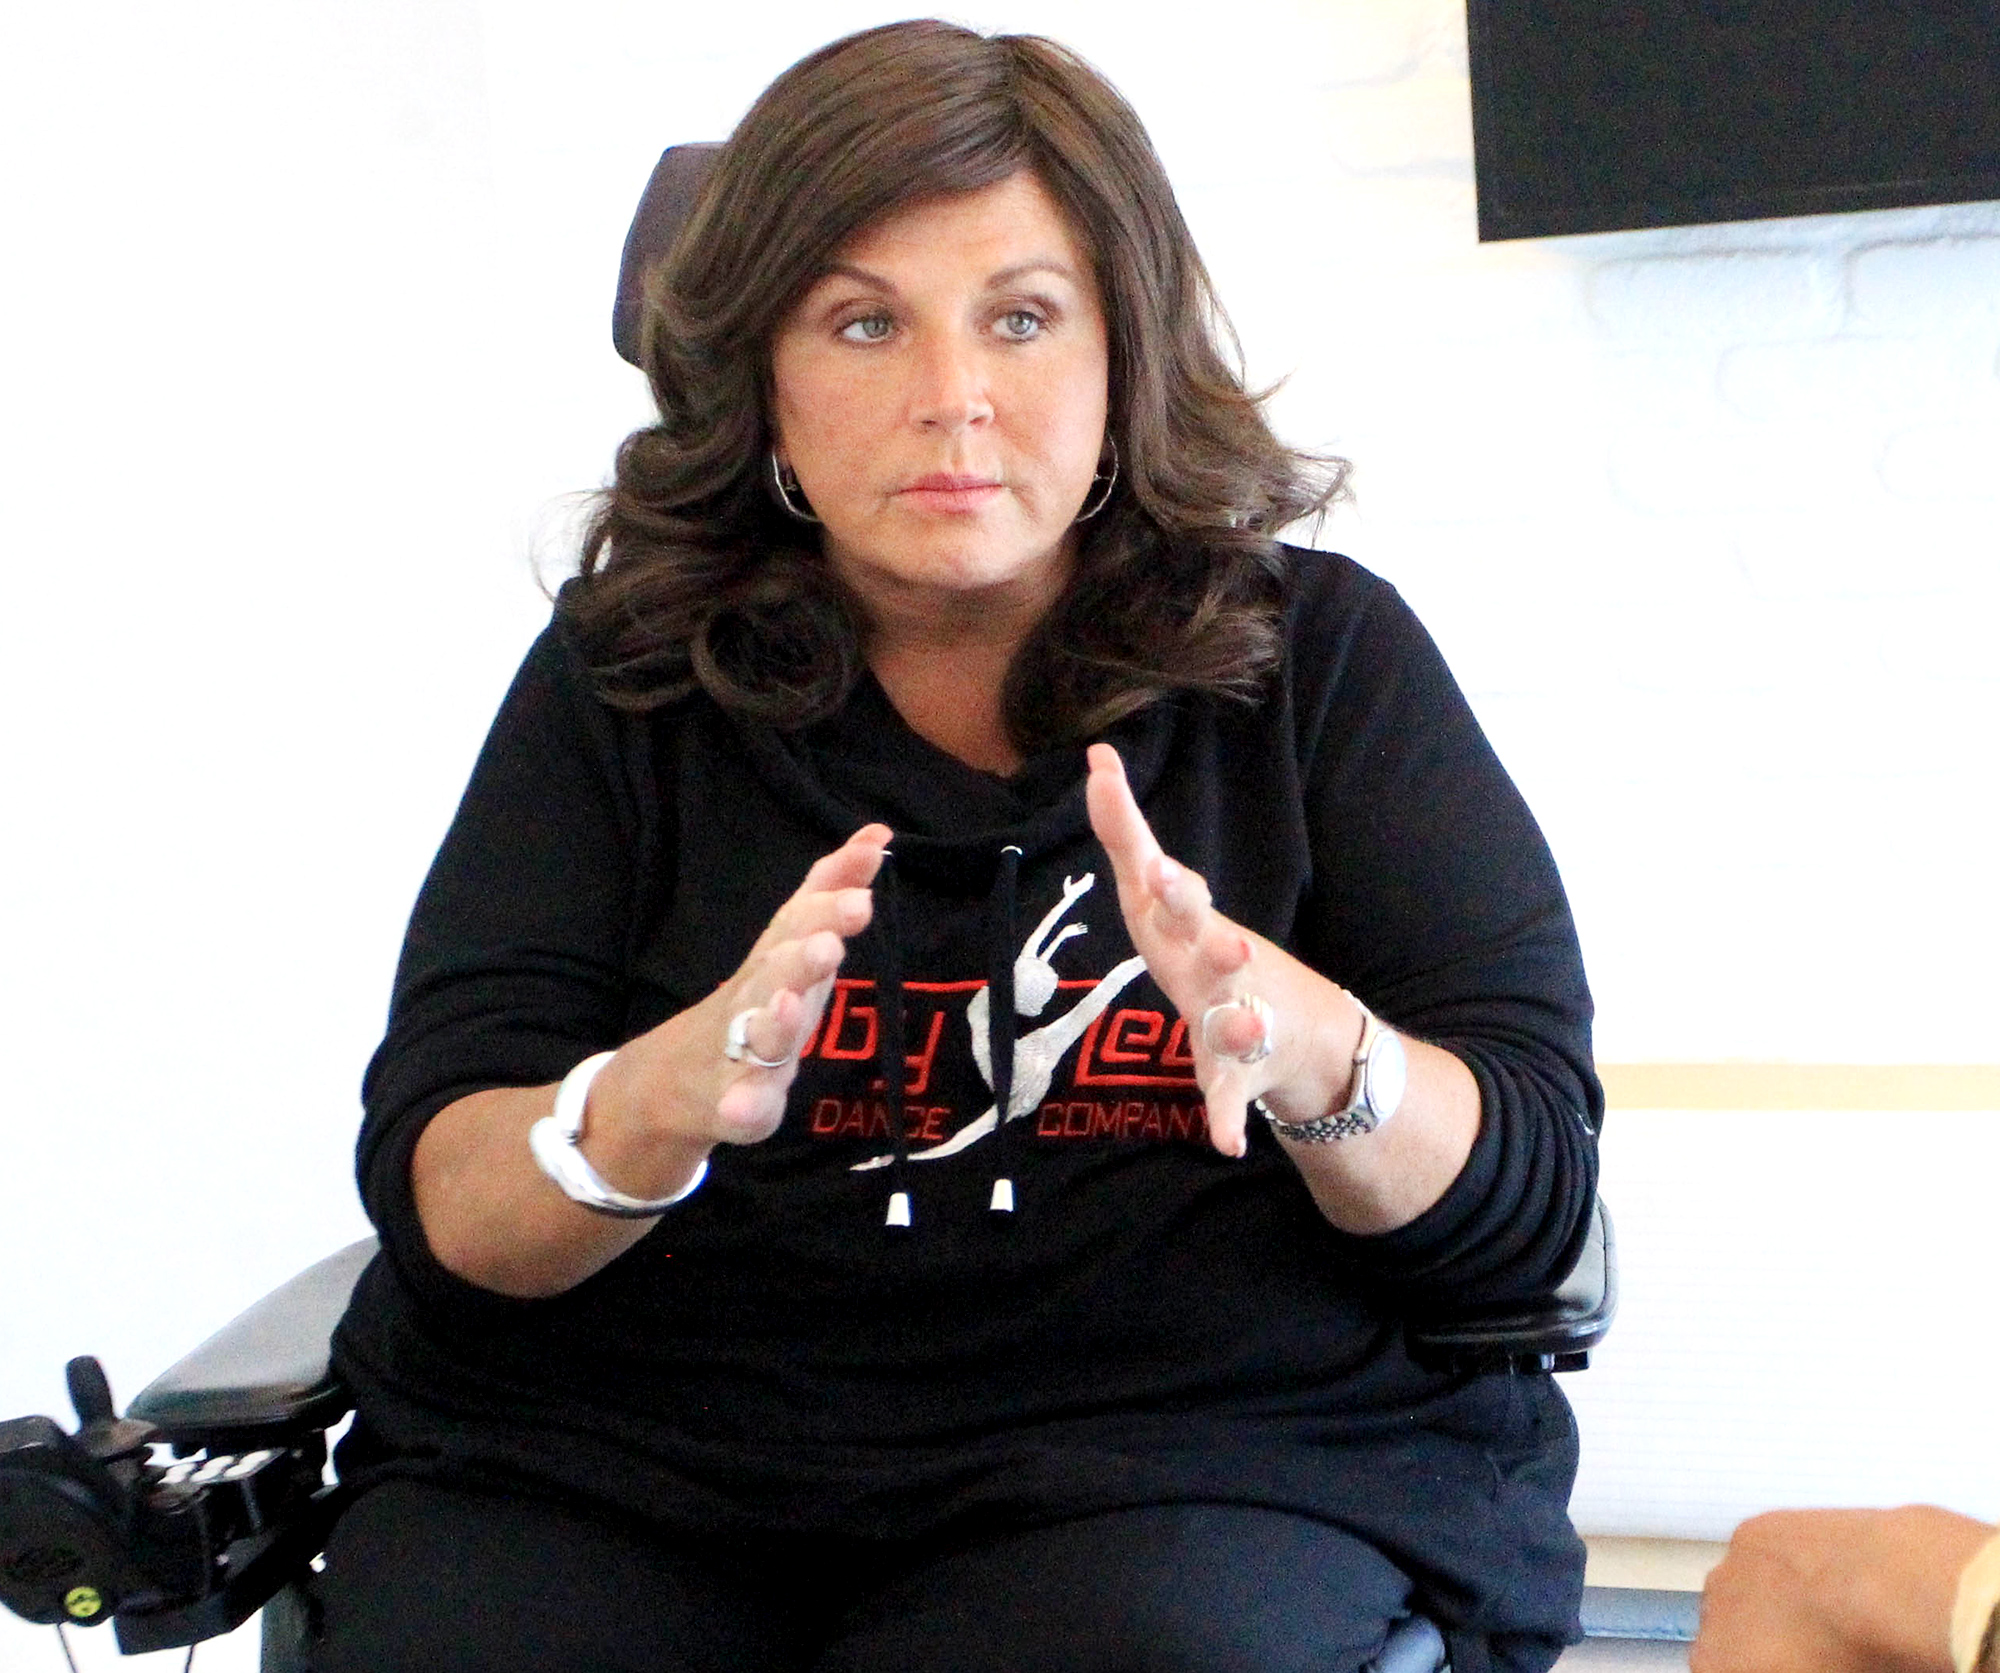 Abby Lee Miller's New Show Canceled Over Dance Mom Racism